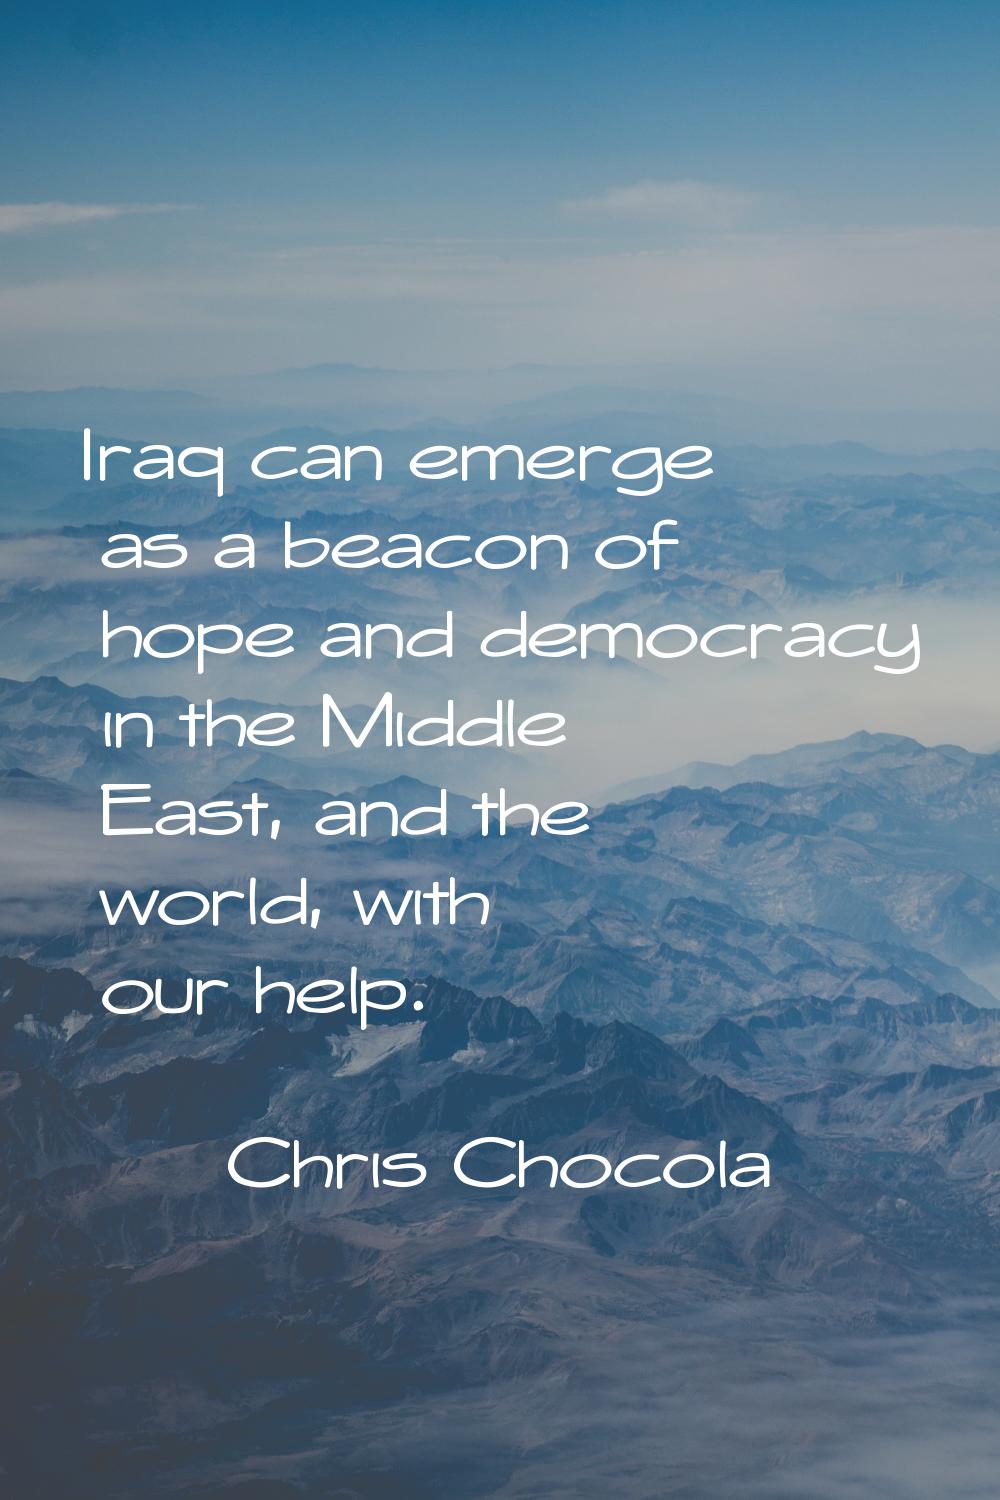 Iraq can emerge as a beacon of hope and democracy in the Middle East, and the world, with our help.